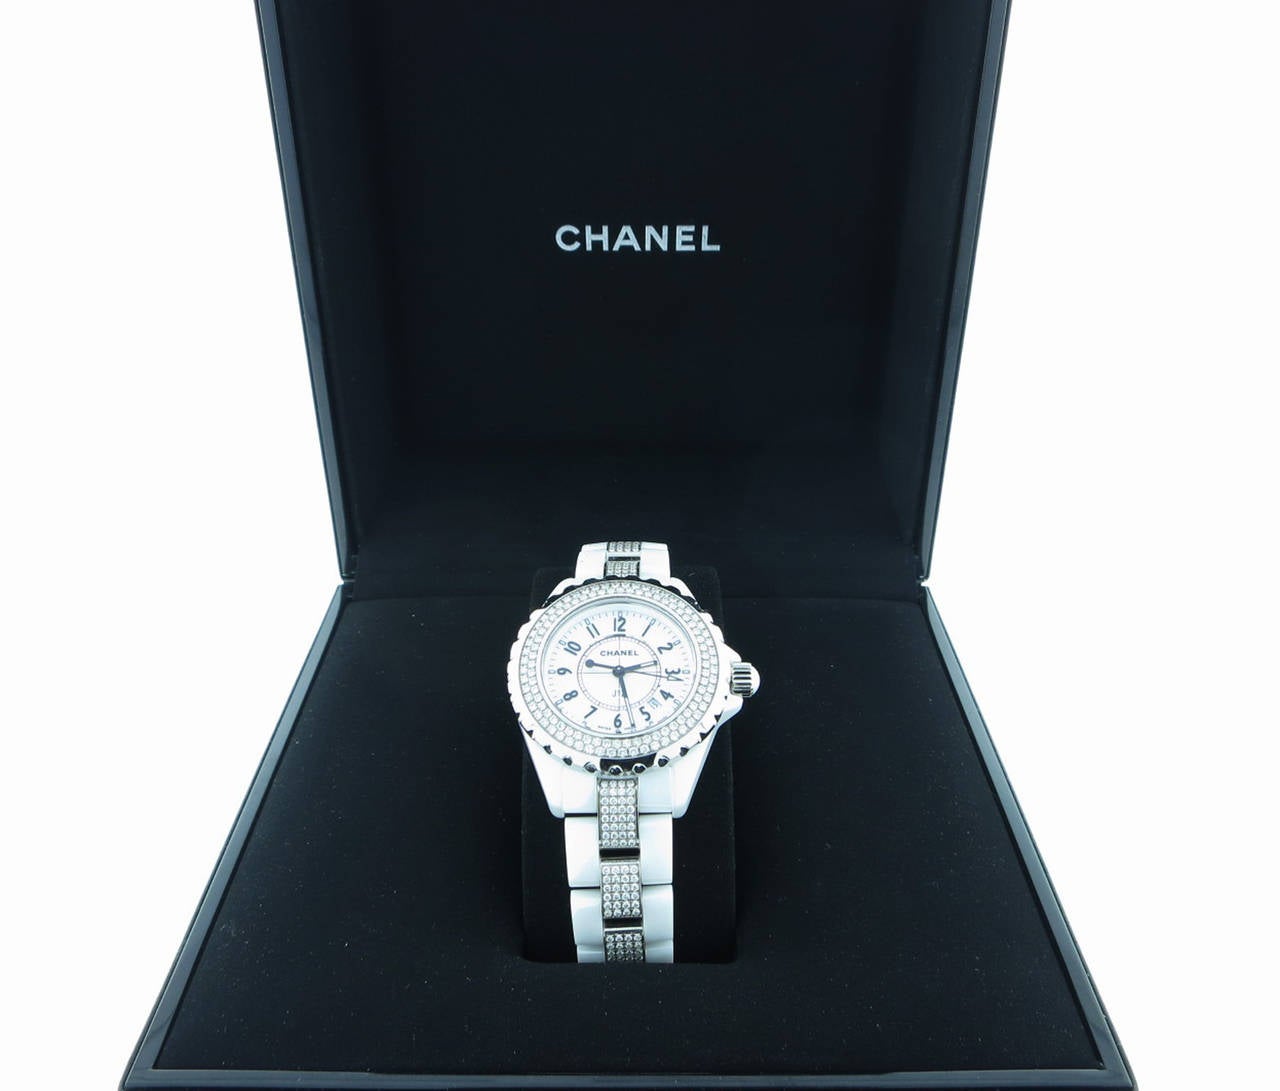 Unisex  Chanel  38mm.  white ceramic quartz wristwatch with diamond bezel and  band with deployant catch. Swiss made. New with box certificate of authenticity and international guarantee. Never worn.